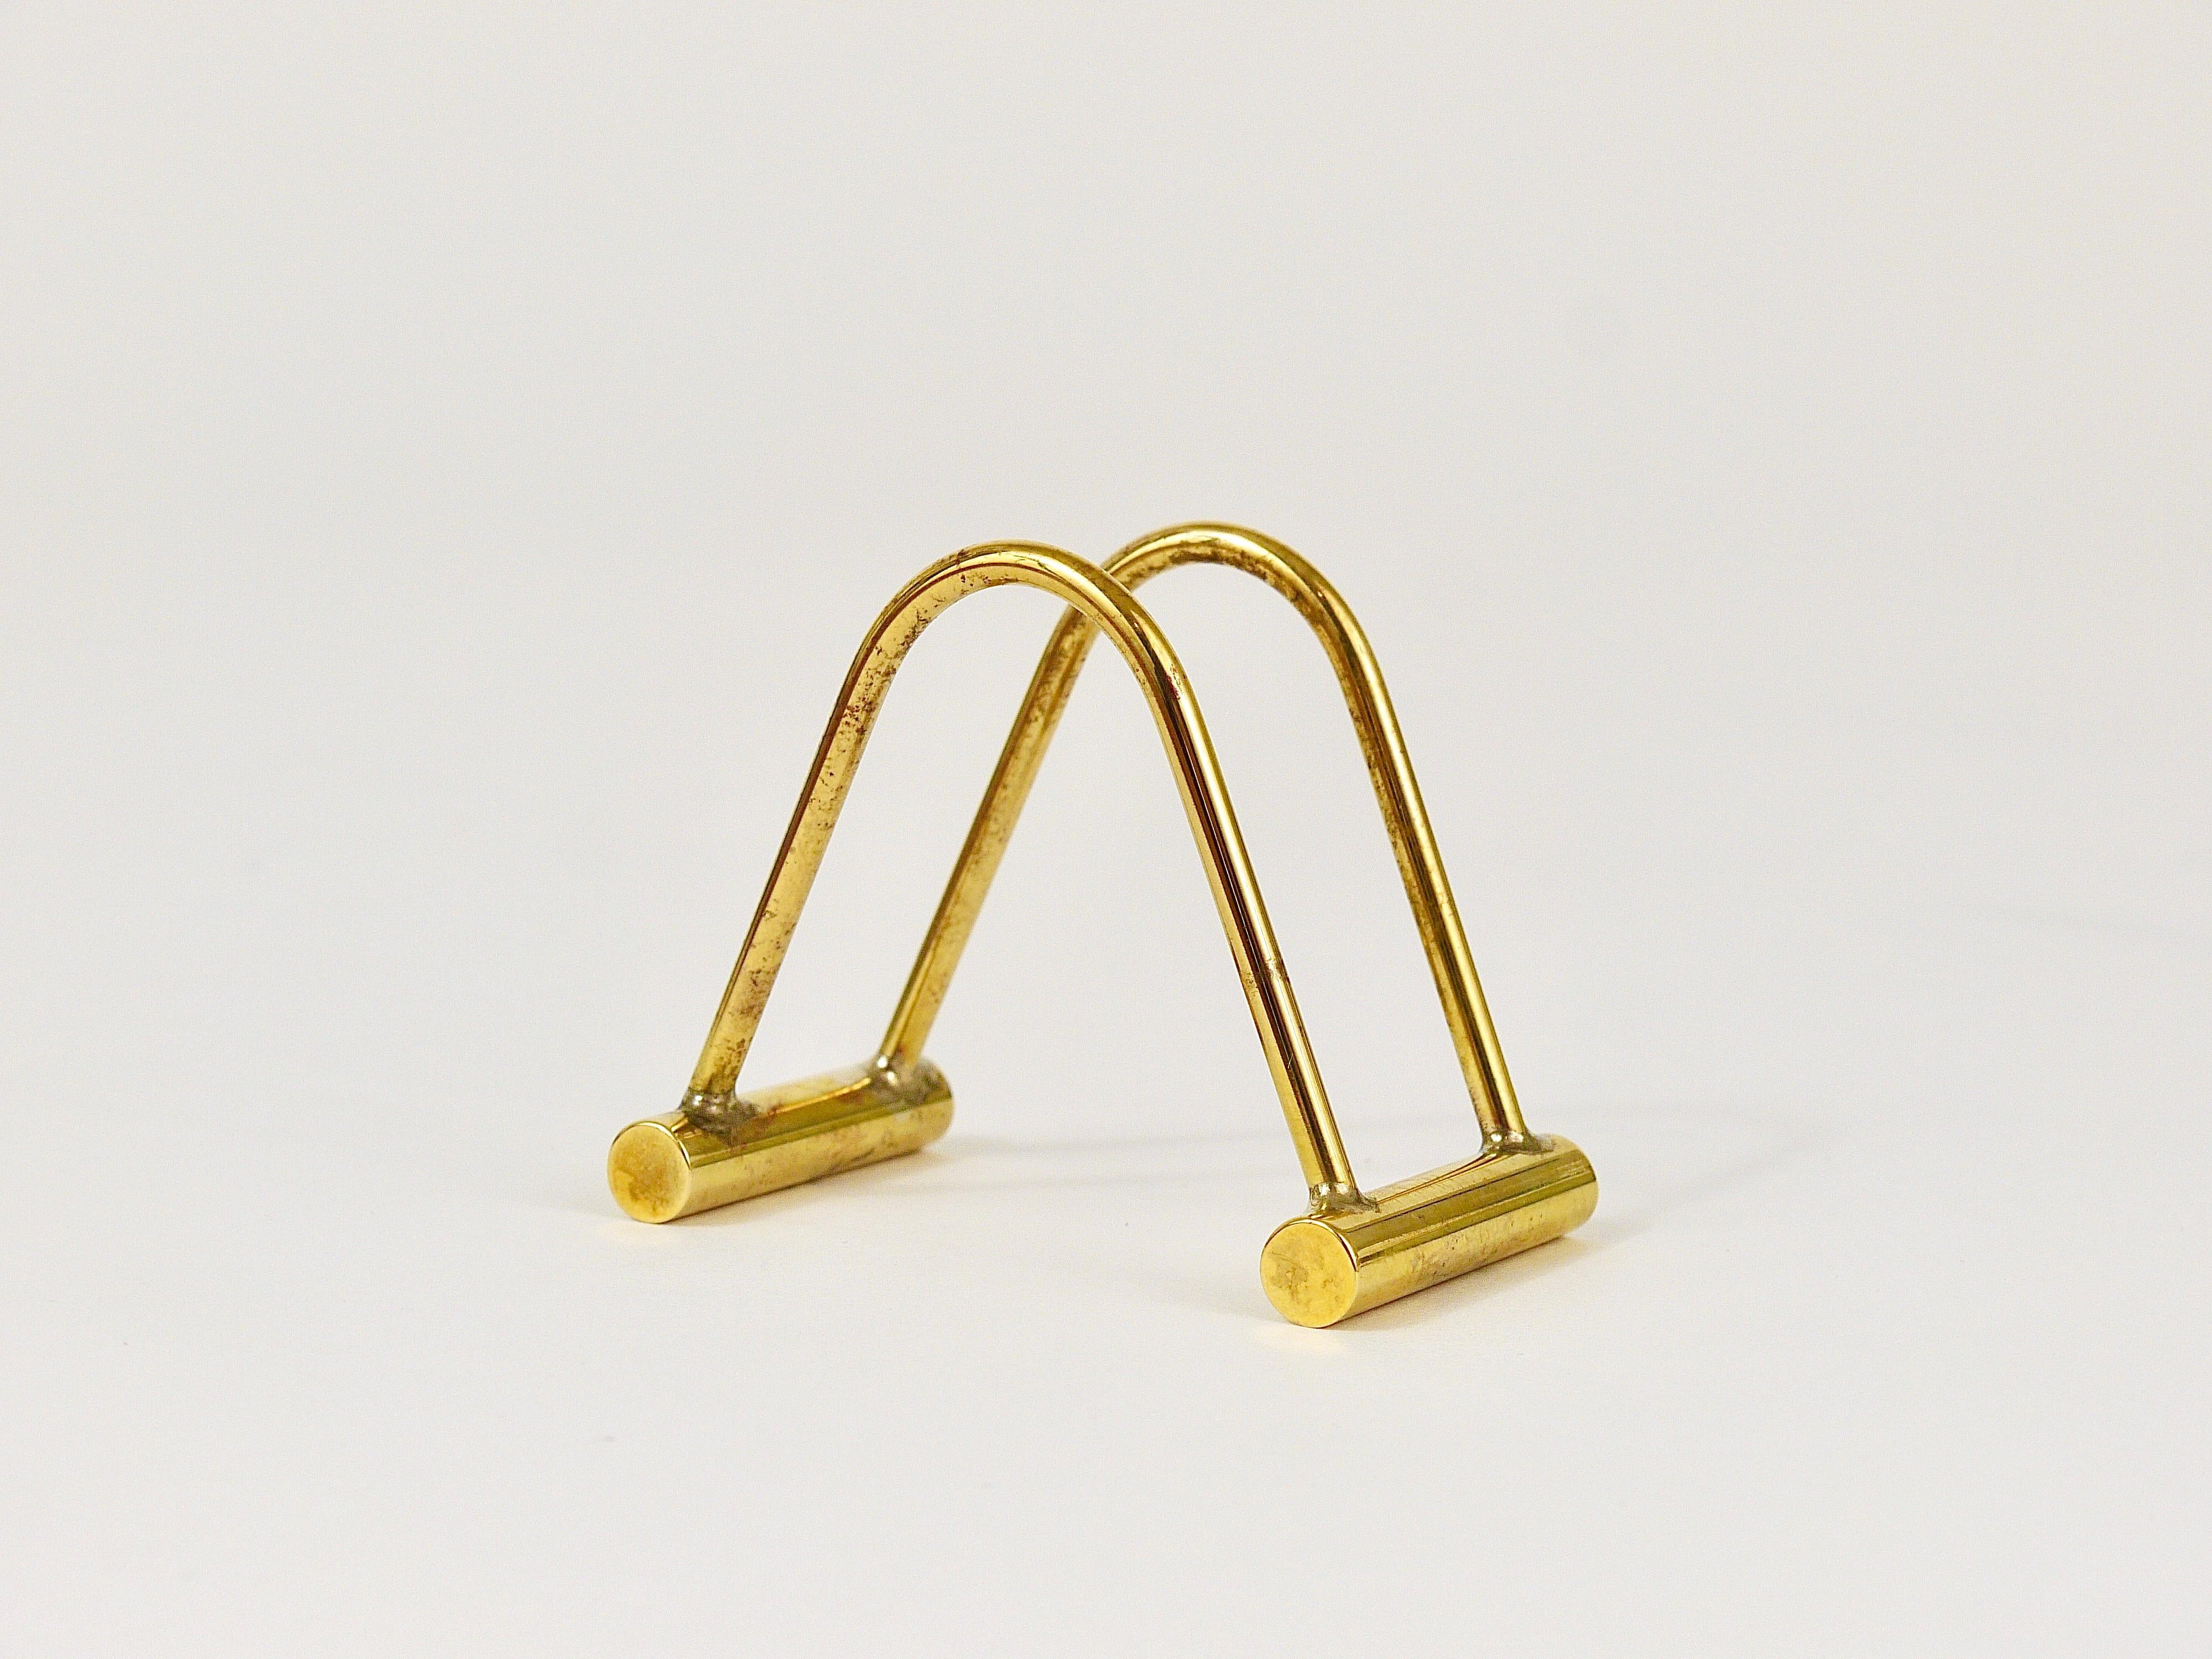 Carl Auböck Up to Three Midcentury Polished Brass Card Holder, Austria, 1950s For Sale 2